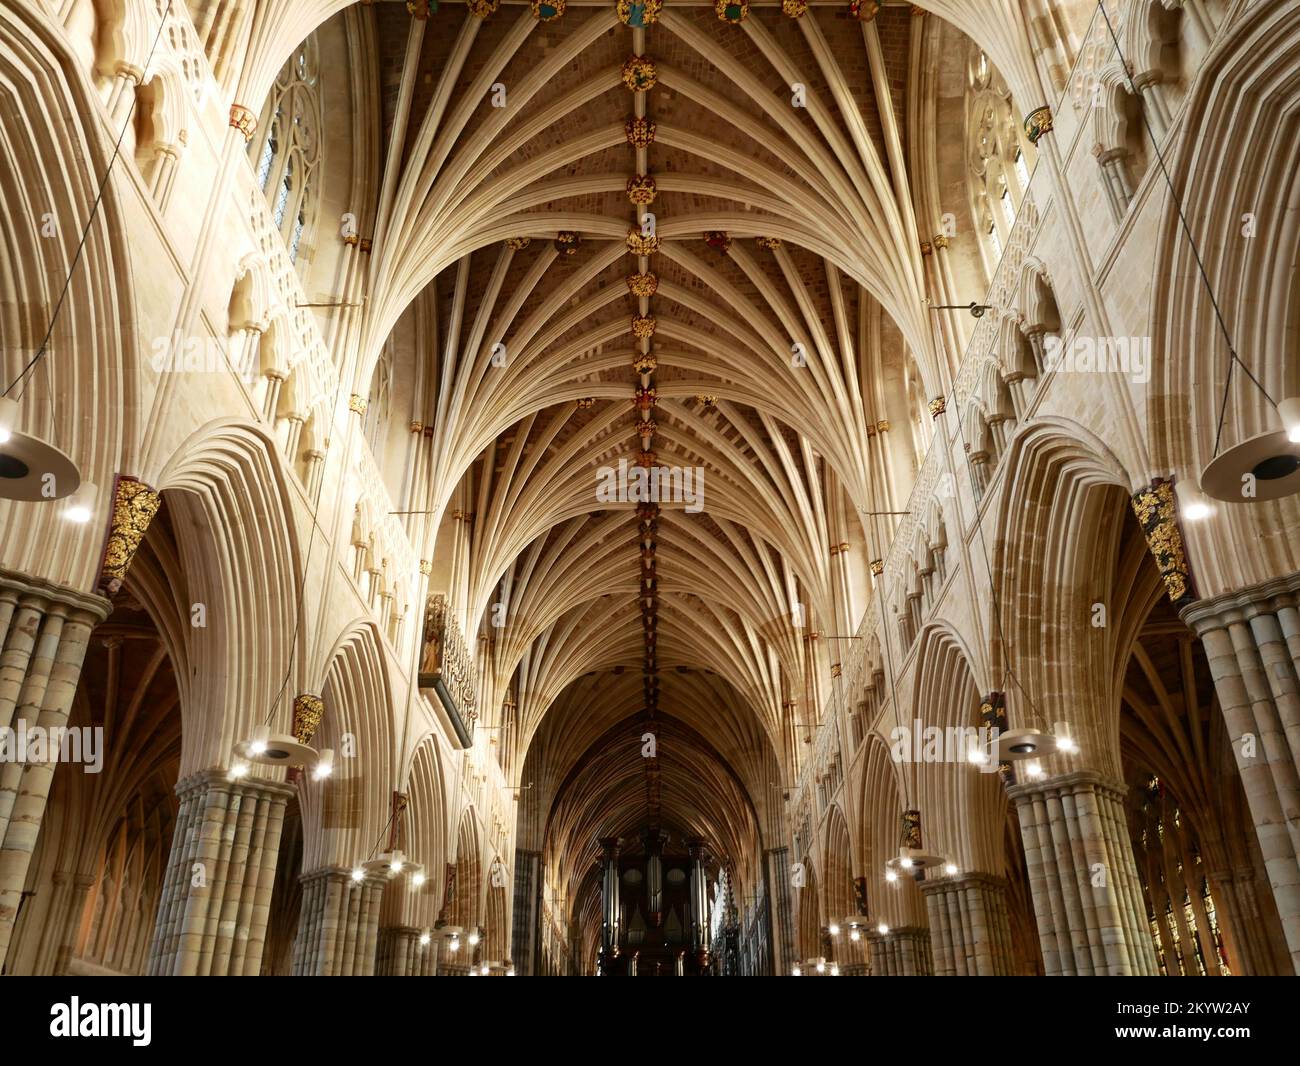 Exeter Cathedral Vault ceiling interior Stock Photo